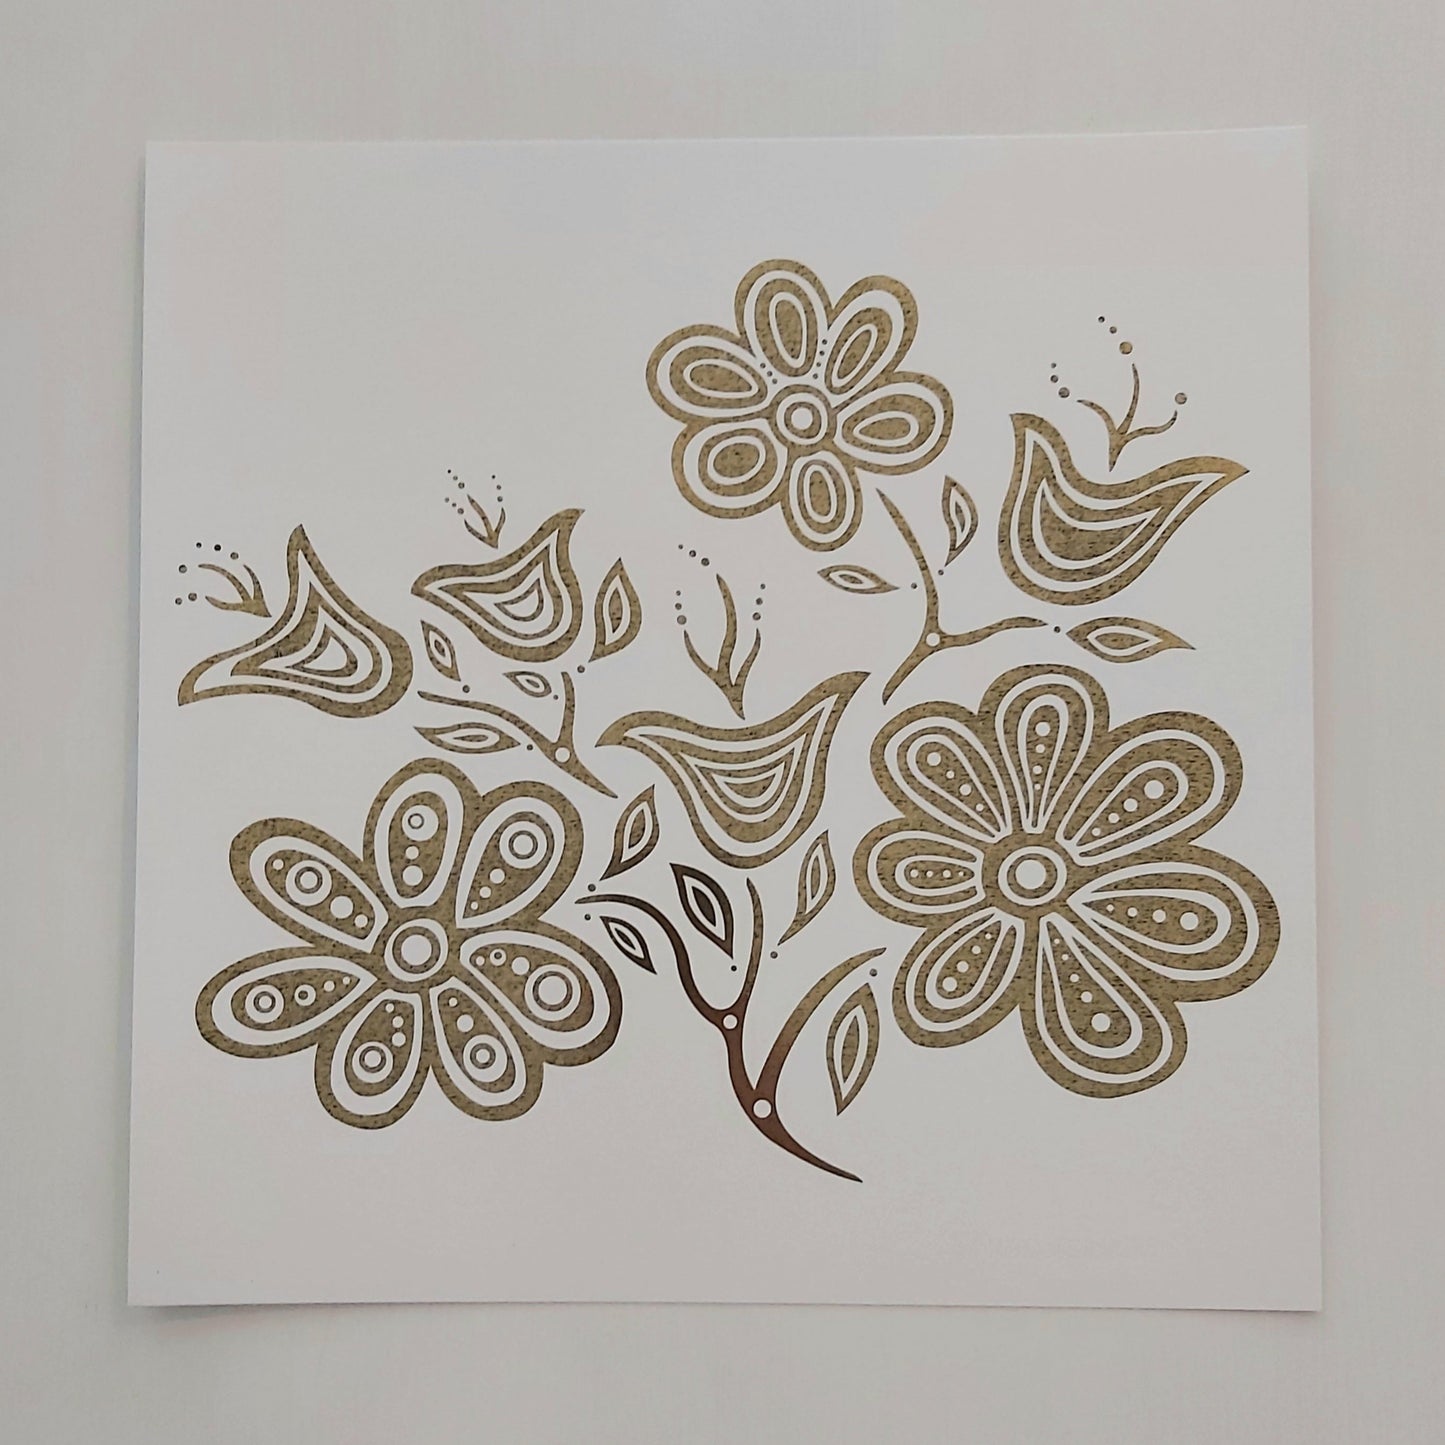 Print of Patrick Hunter's painting of flowers, gold leaf on white, woodland art style.